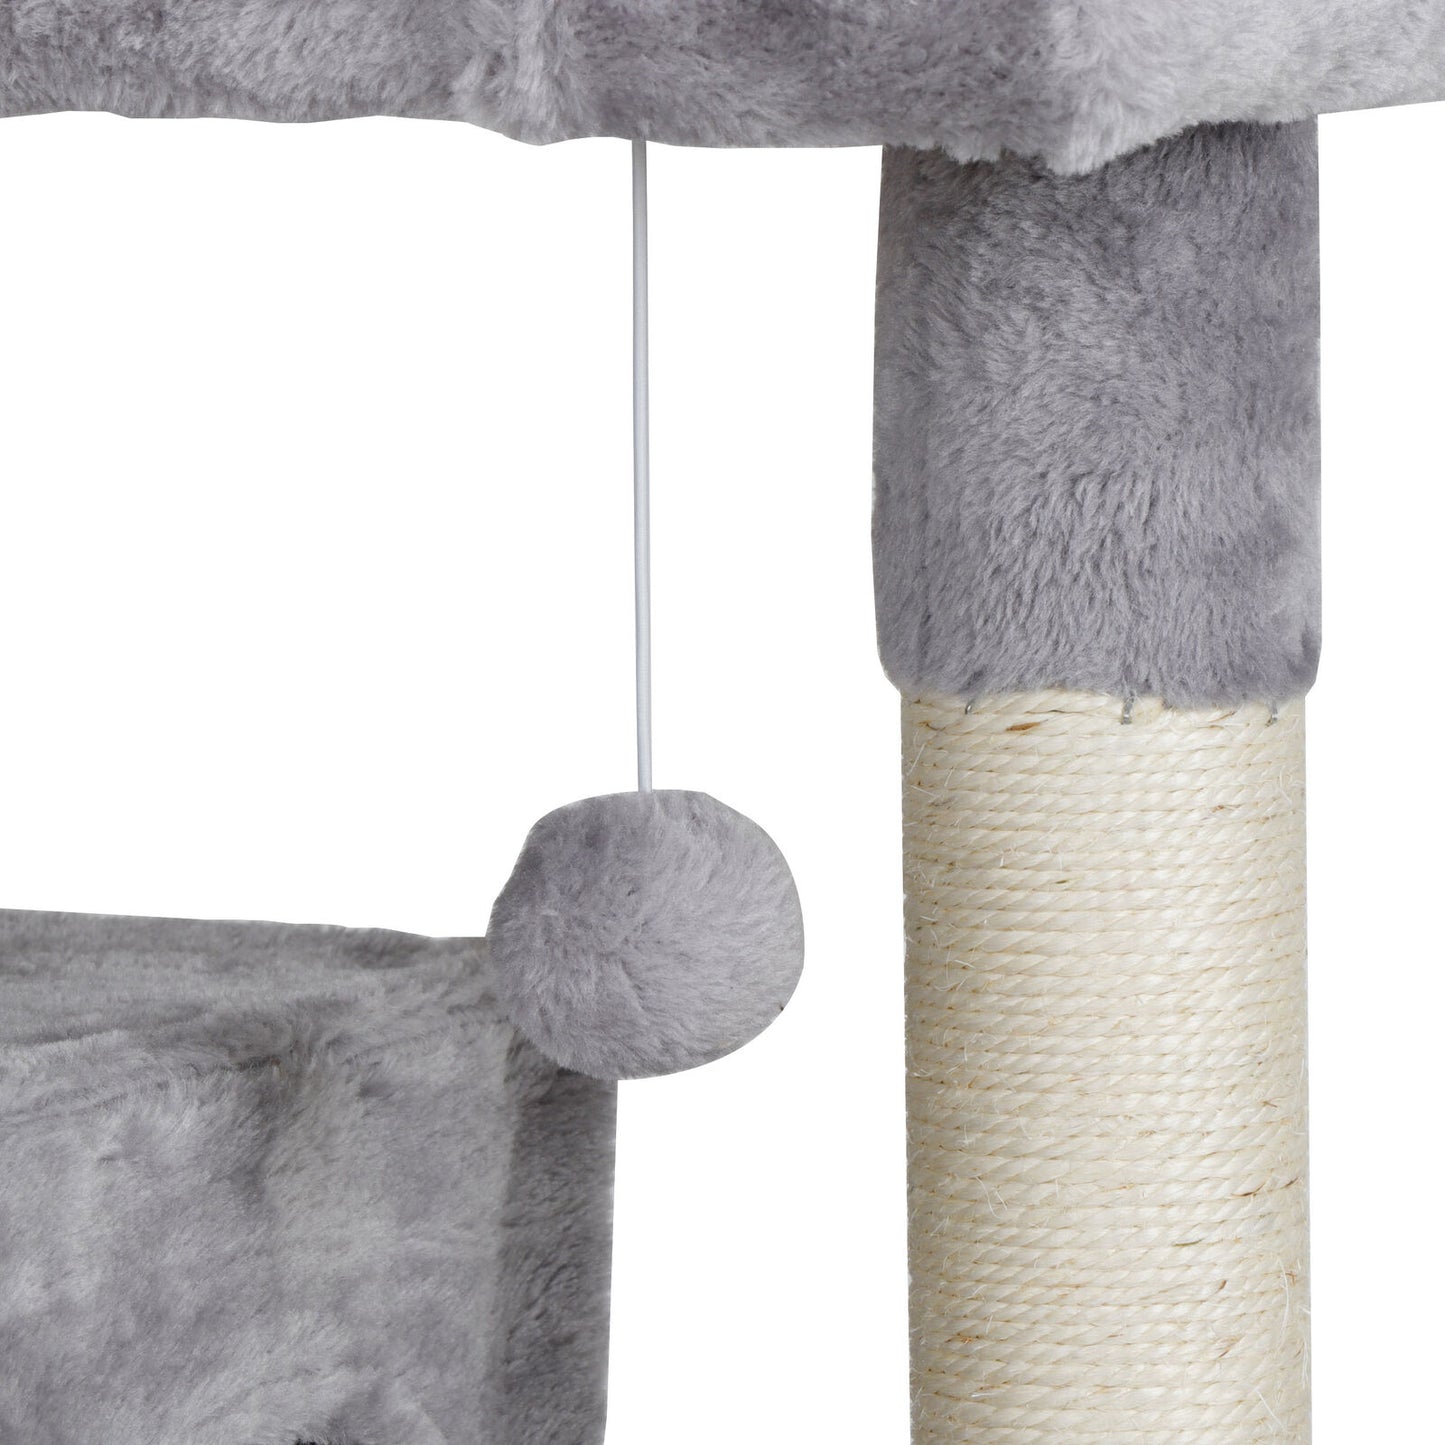 53" Cat Tree Scratching Post Condo Activity Tower Playhouse W/ Cave & Ladders